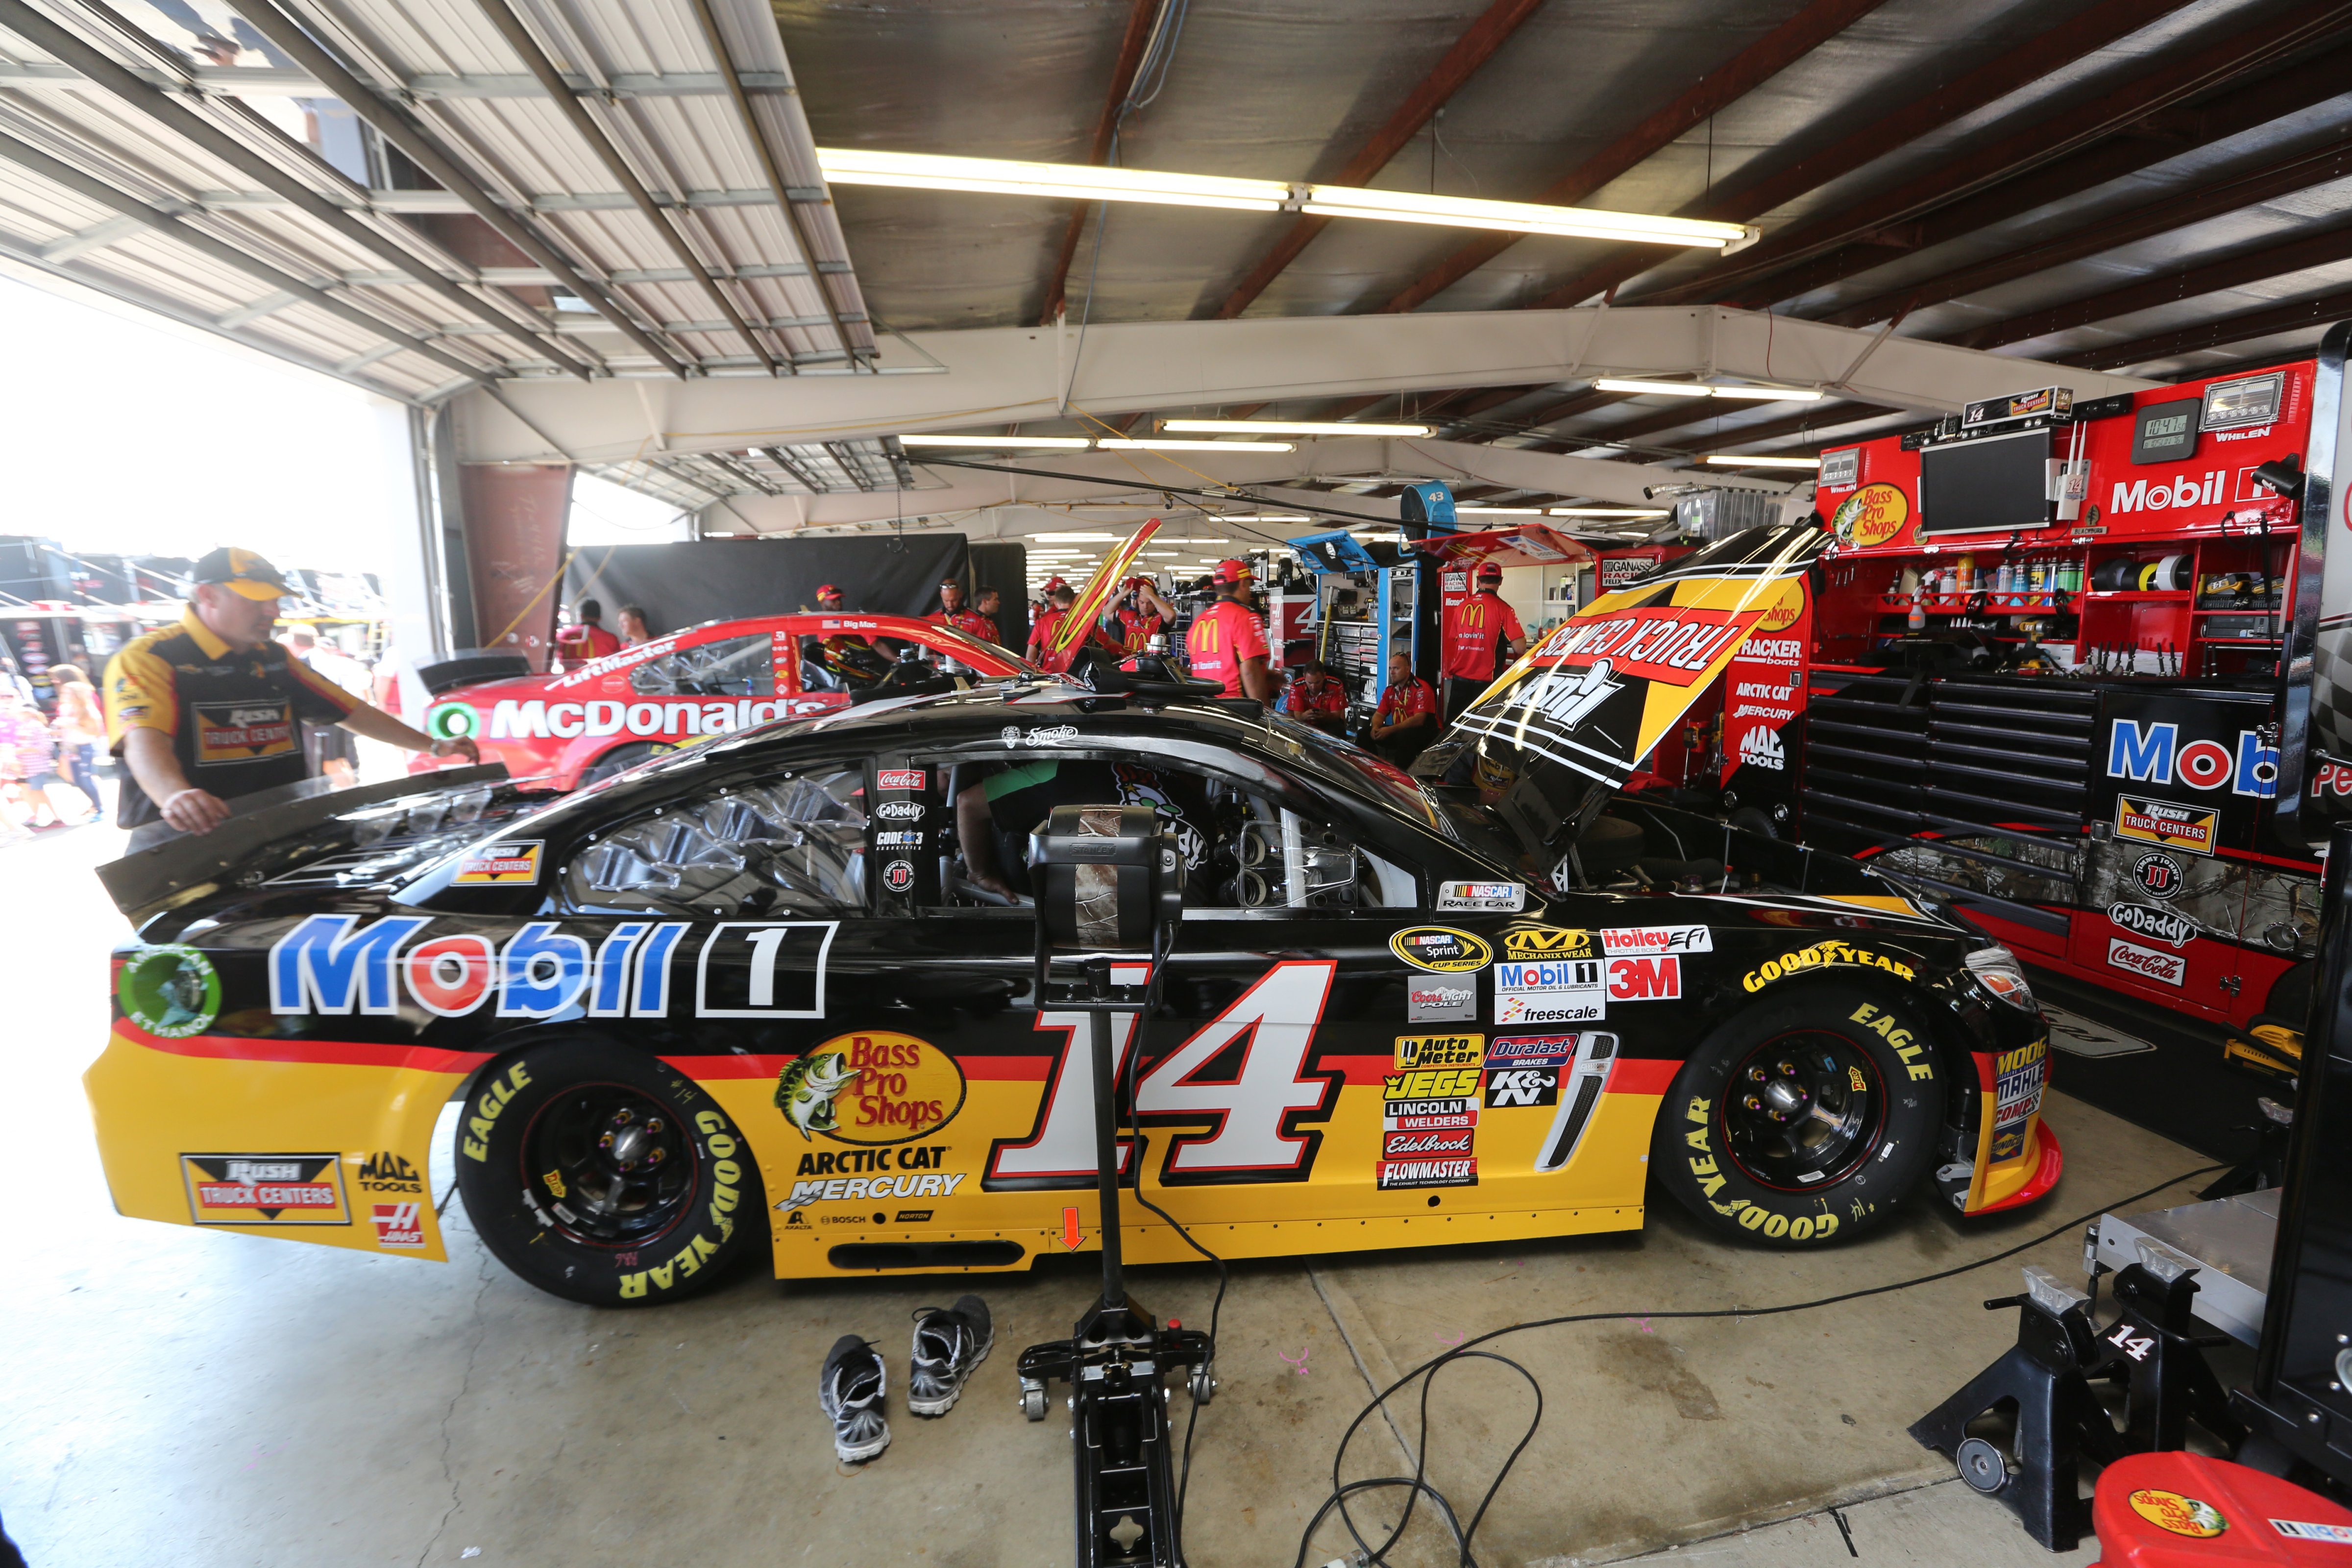 The #14 Rush Truck Centers/Mobil 1 Chevrolet is prepared by its crew in the garage area prior to the NASCAR Sprint Cup Series Cheez-It 355 at Watkins Glen International on August 10, 2014 in Watkins Glen, New York. (Jerry Markland—Getty Images)